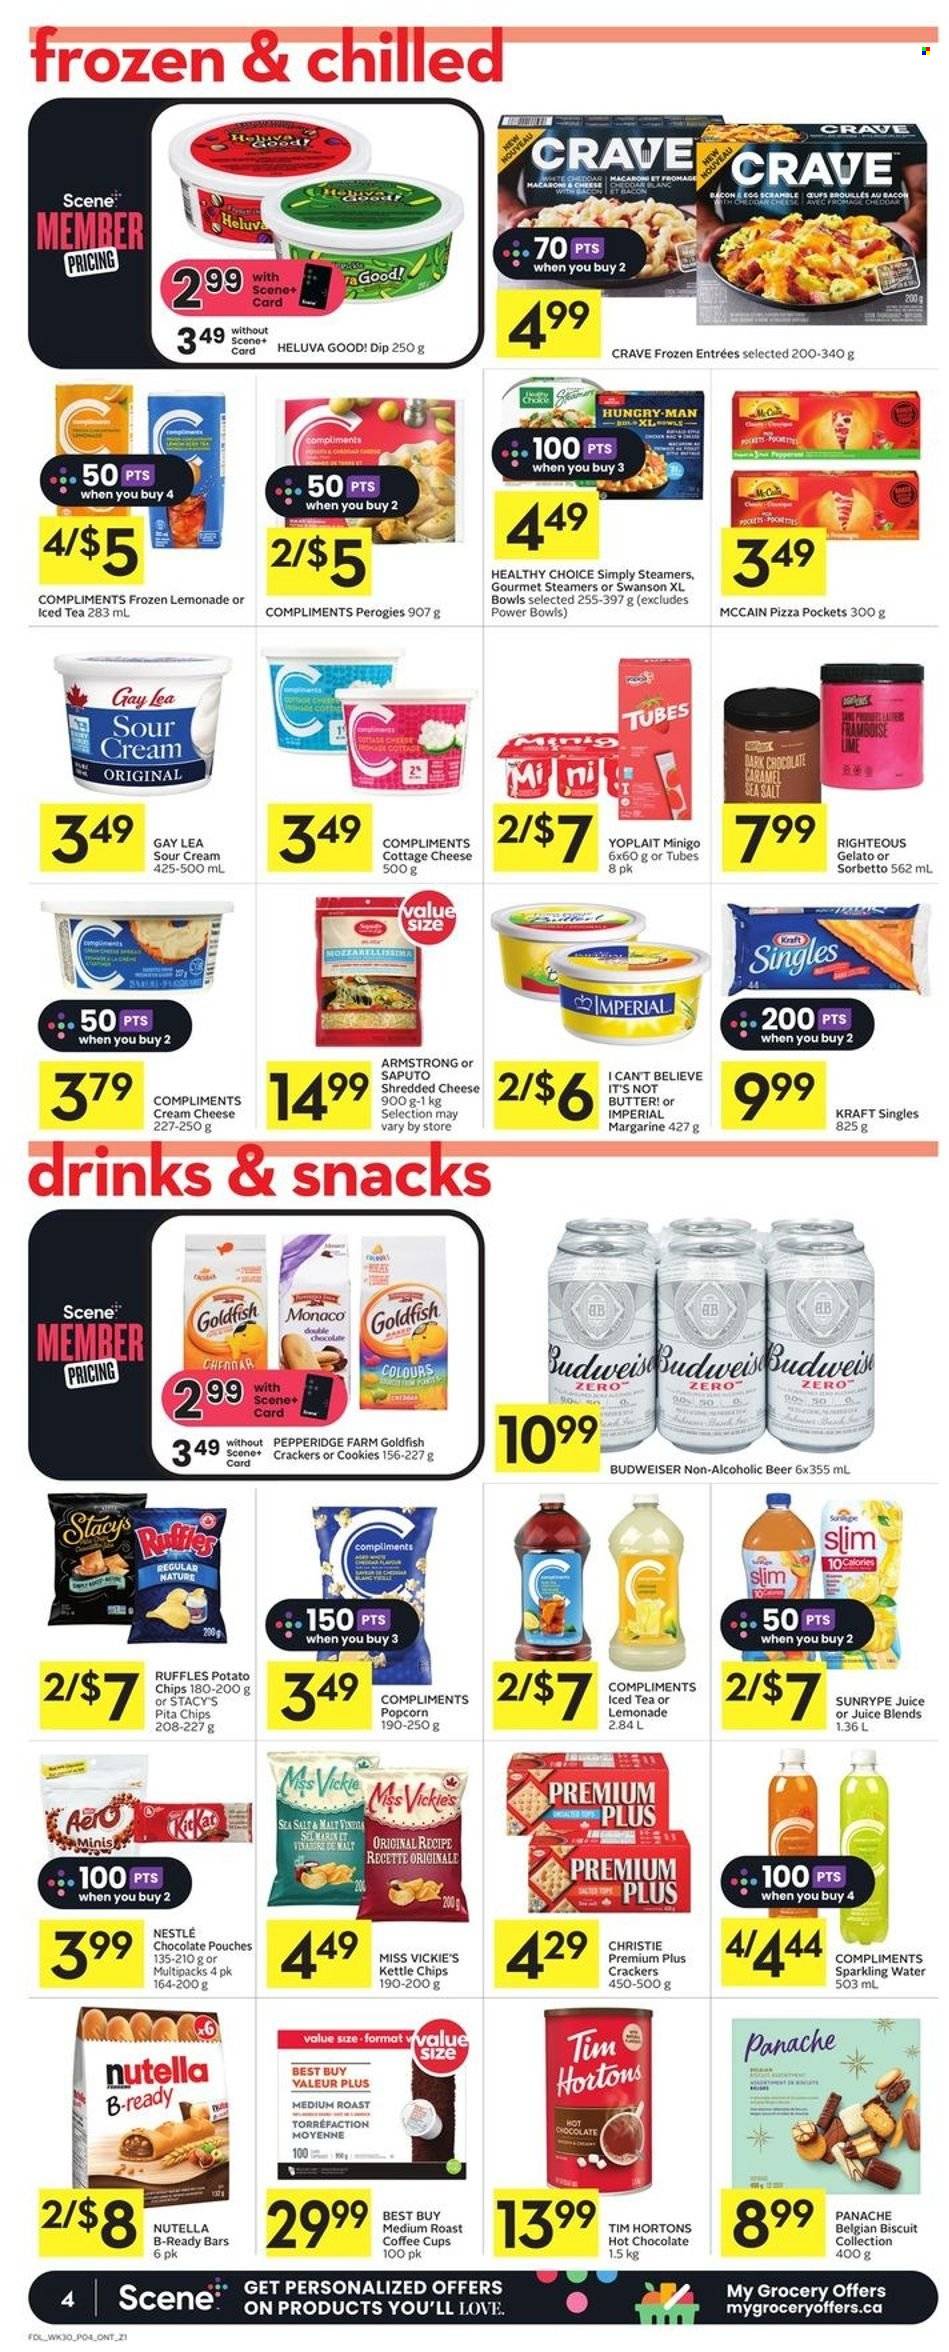 thumbnail - Foodland Flyer - November 24, 2022 - November 30, 2022 - Sales products - pizza, Healthy Choice, Kraft®, bacon, cottage cheese, cream cheese, sandwich slices, shredded cheese, Kraft Singles, Yoplait, eggs, margarine, I Can't Believe It's Not Butter, sour cream, gelato, McCain, cookies, crackers, biscuit, potato chips, popcorn, Goldfish, Ruffles, pita chips, malt, caramel, juice, ice tea, sparkling water, hot chocolate, beer, Budweiser, Nestlé, Nutella. Page 4.